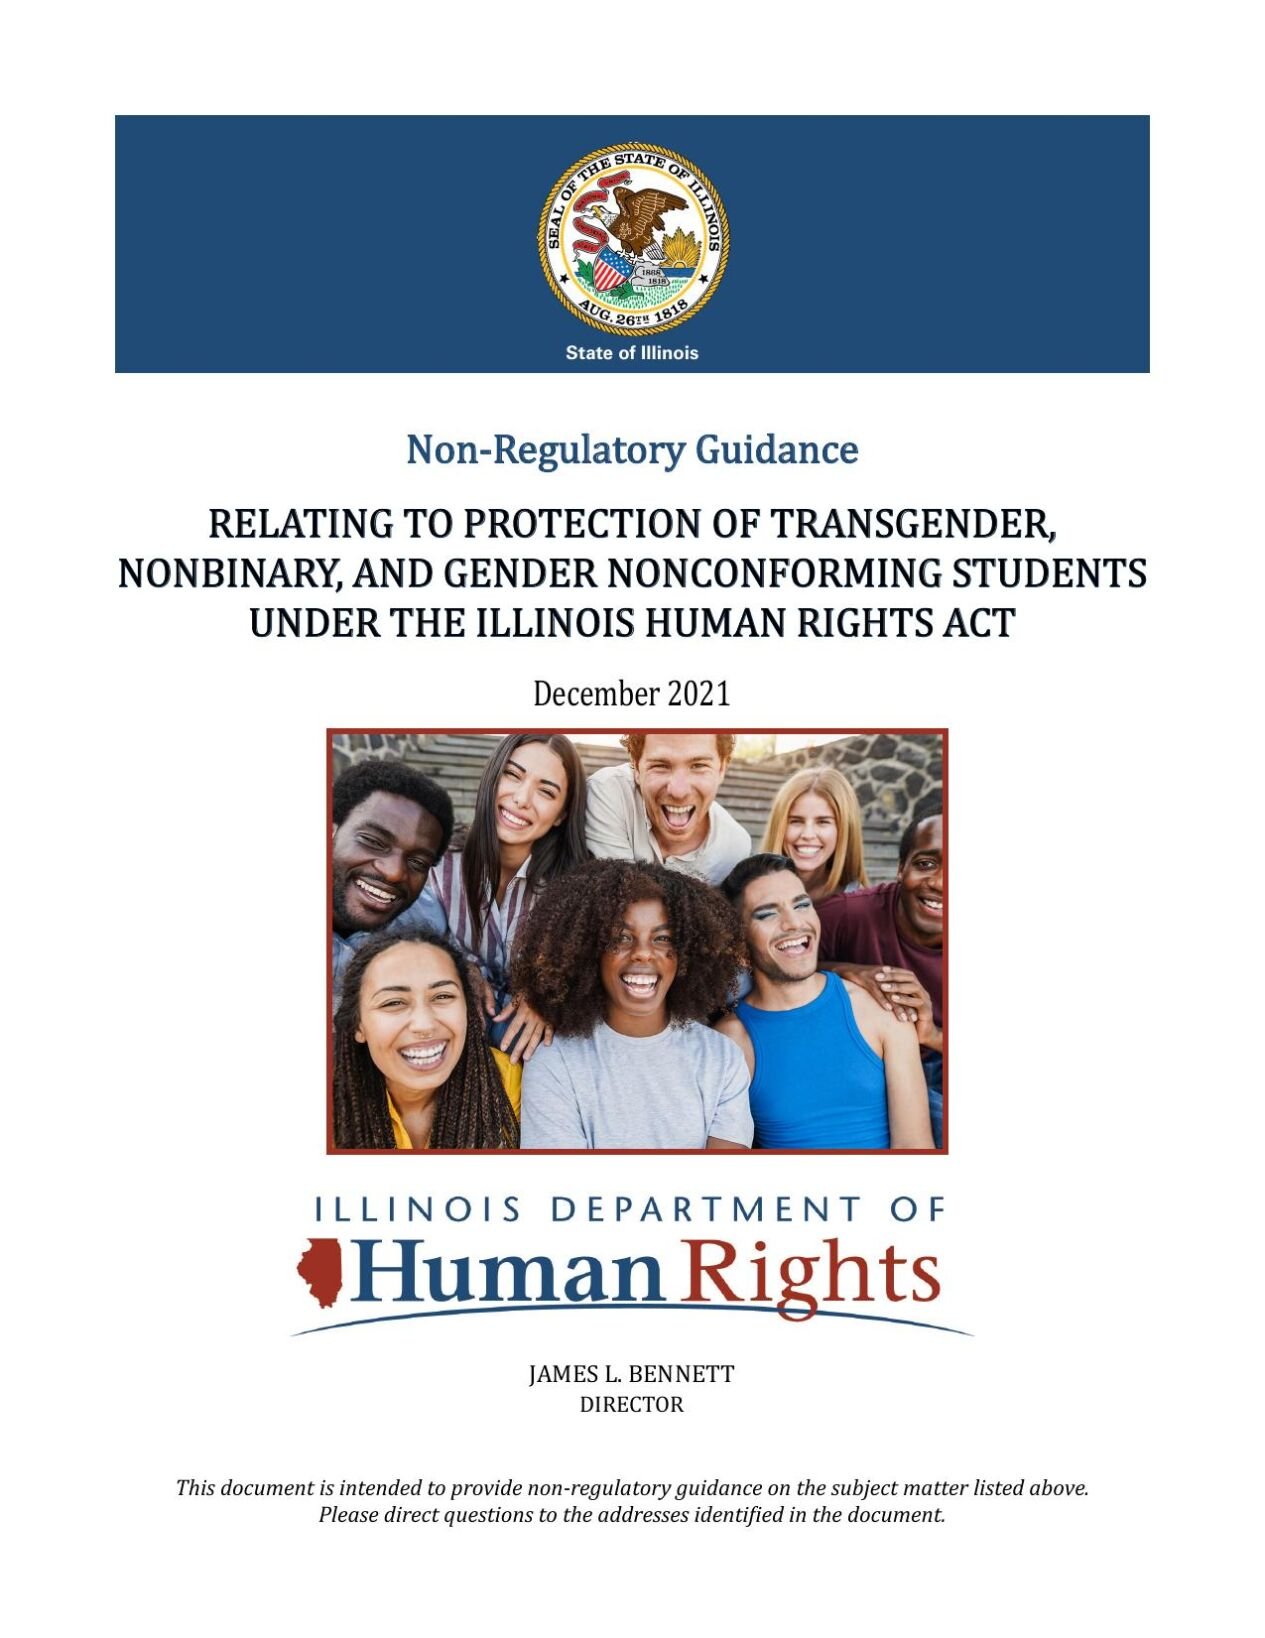 IDHR Guidance Relating to Protection of Transgender, Nonbinary, and Gender Nonconforming Students